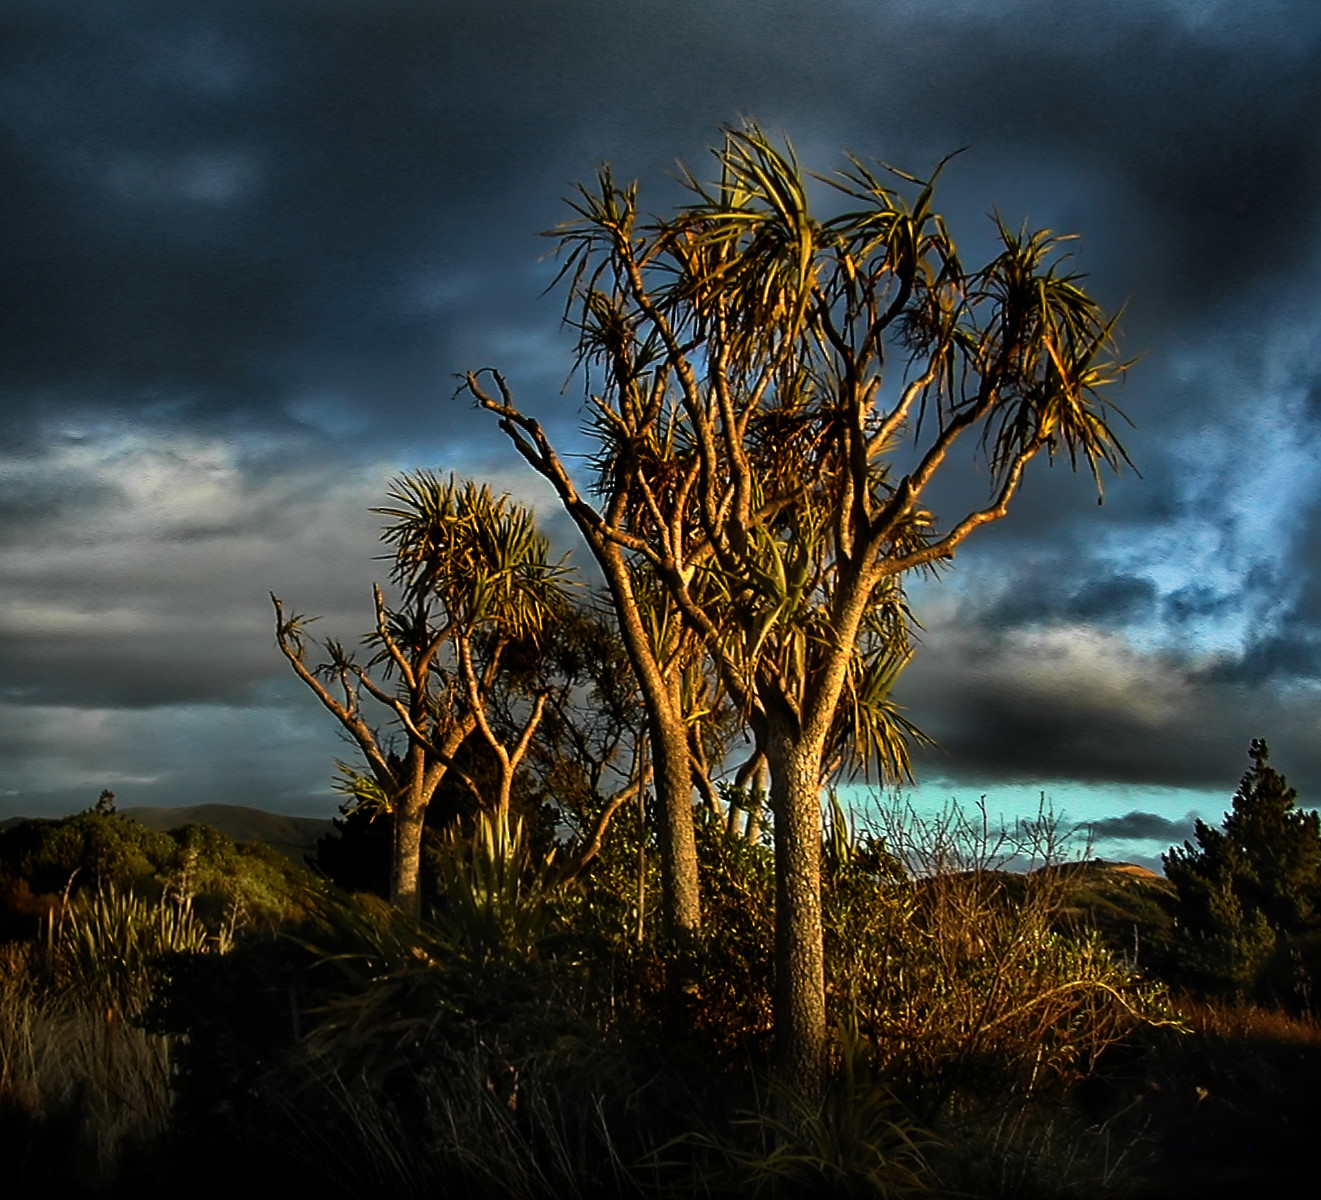 When the sun kissed the cabbage trees goodnight, New Zealand